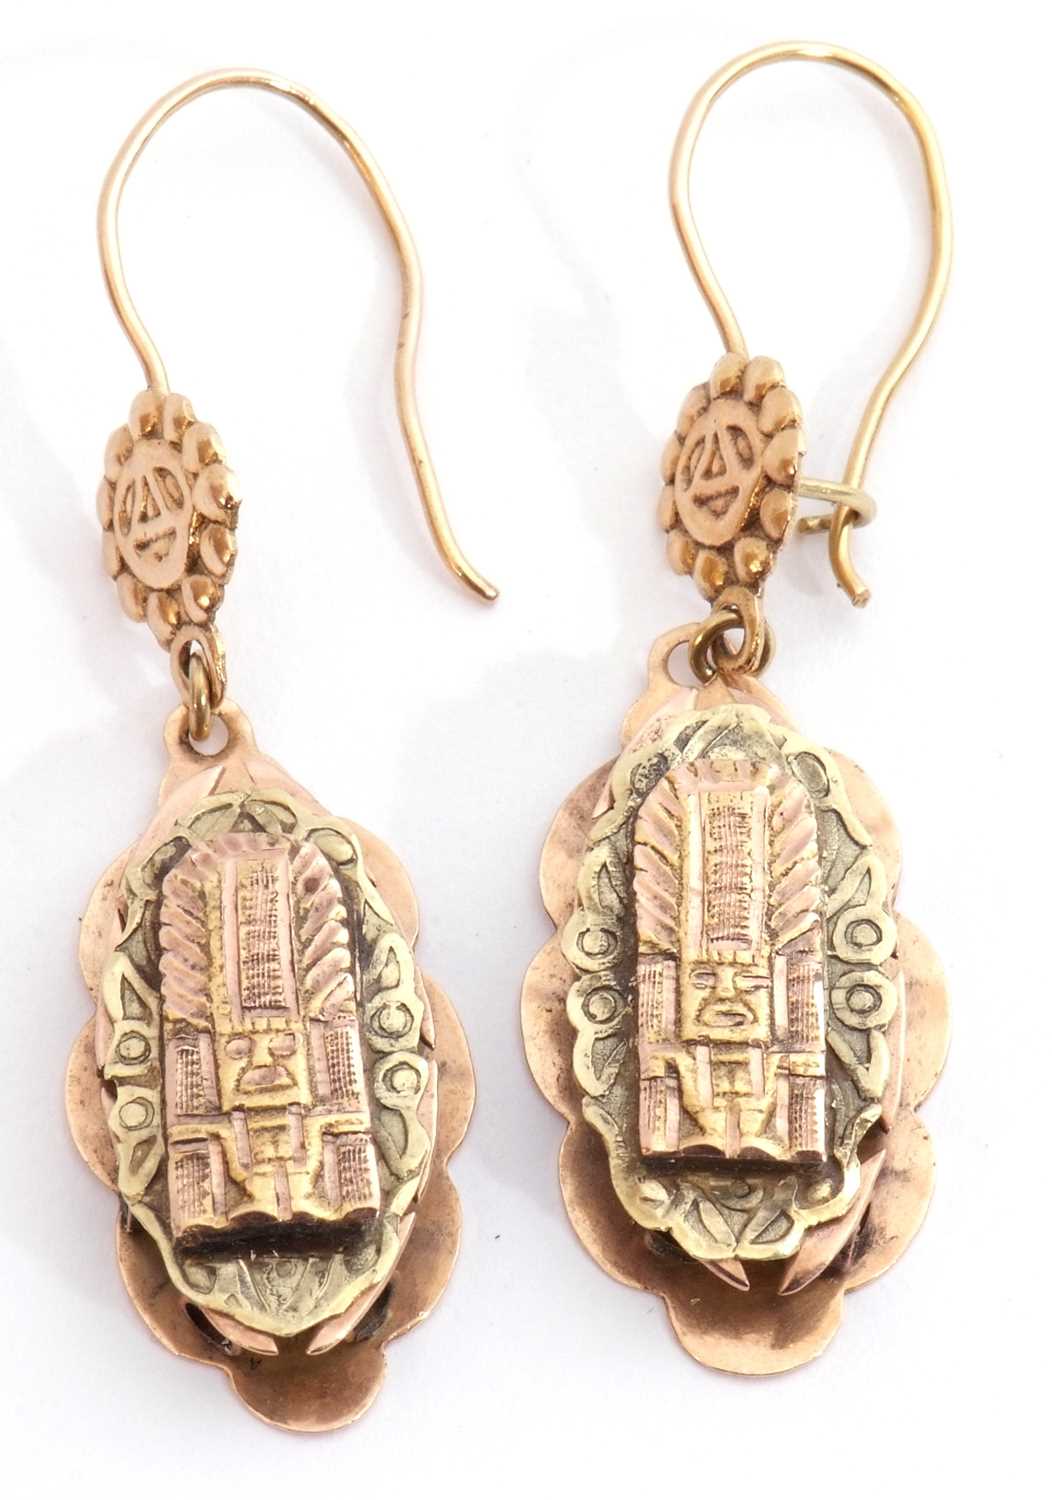 Pair of two-tone coloured pendant earrings in Egyptian style with shepherd hook fittings, stamped